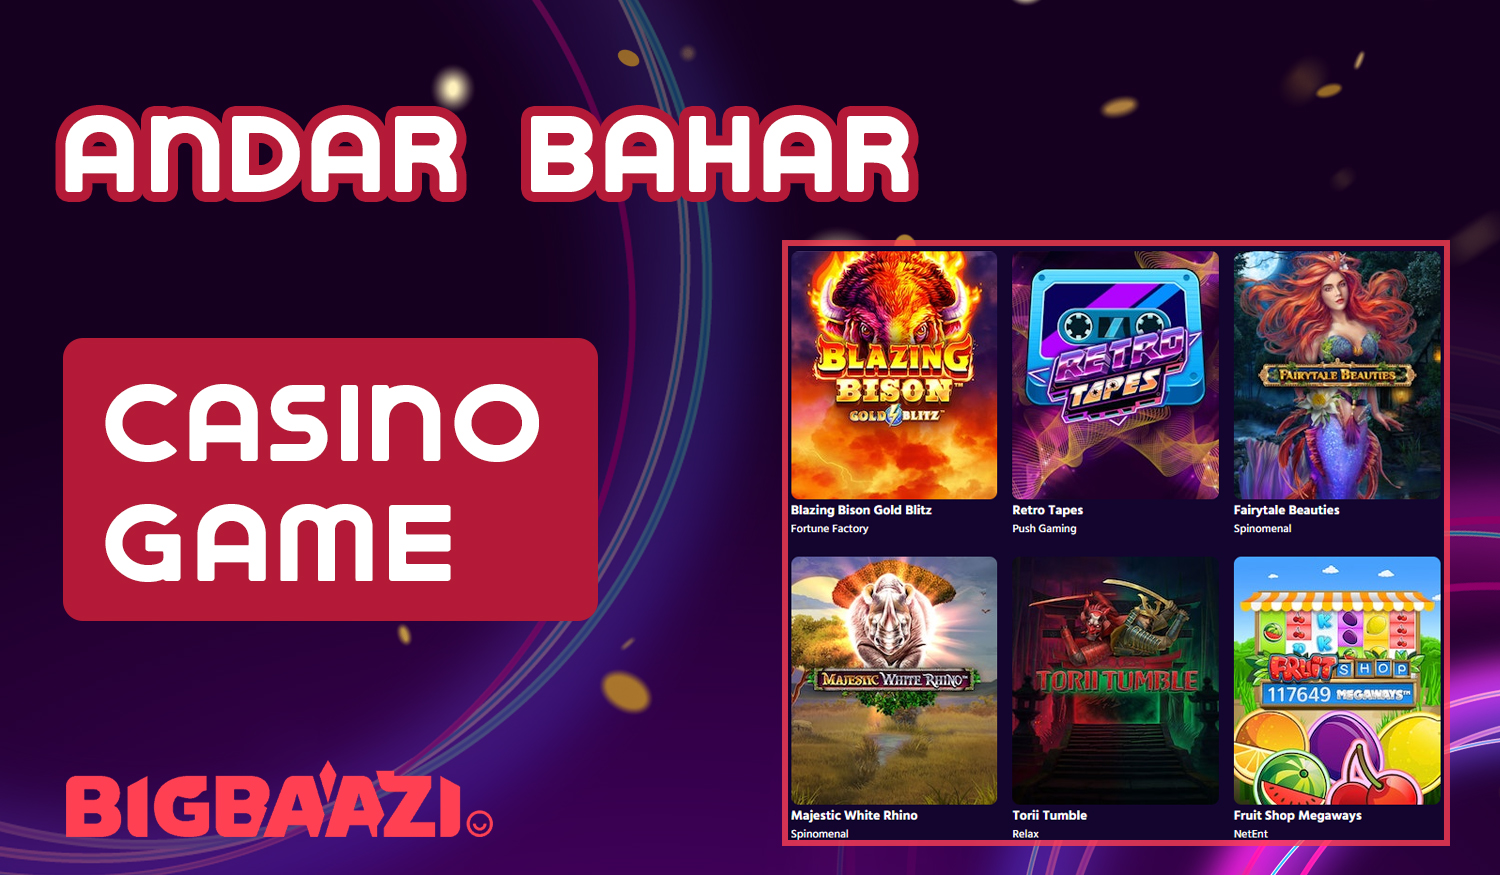 What games are available to online casino fans from India at Big Baazi 